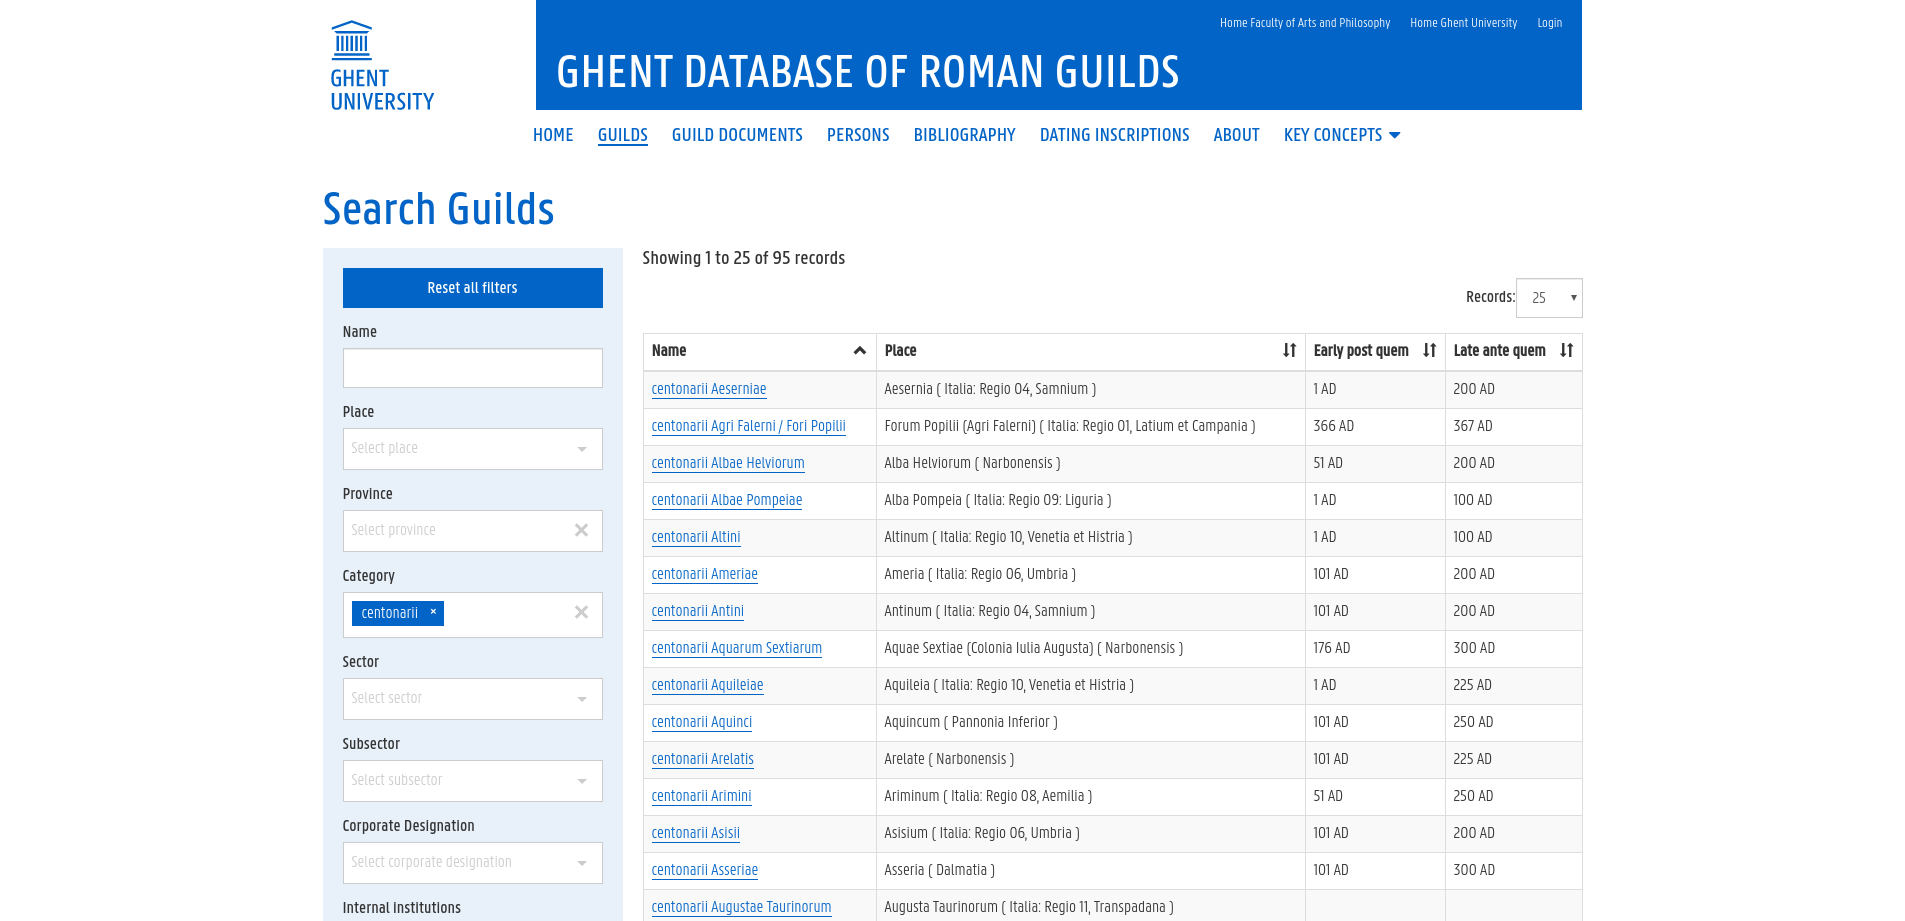 Search query: Guilds of category centonarii